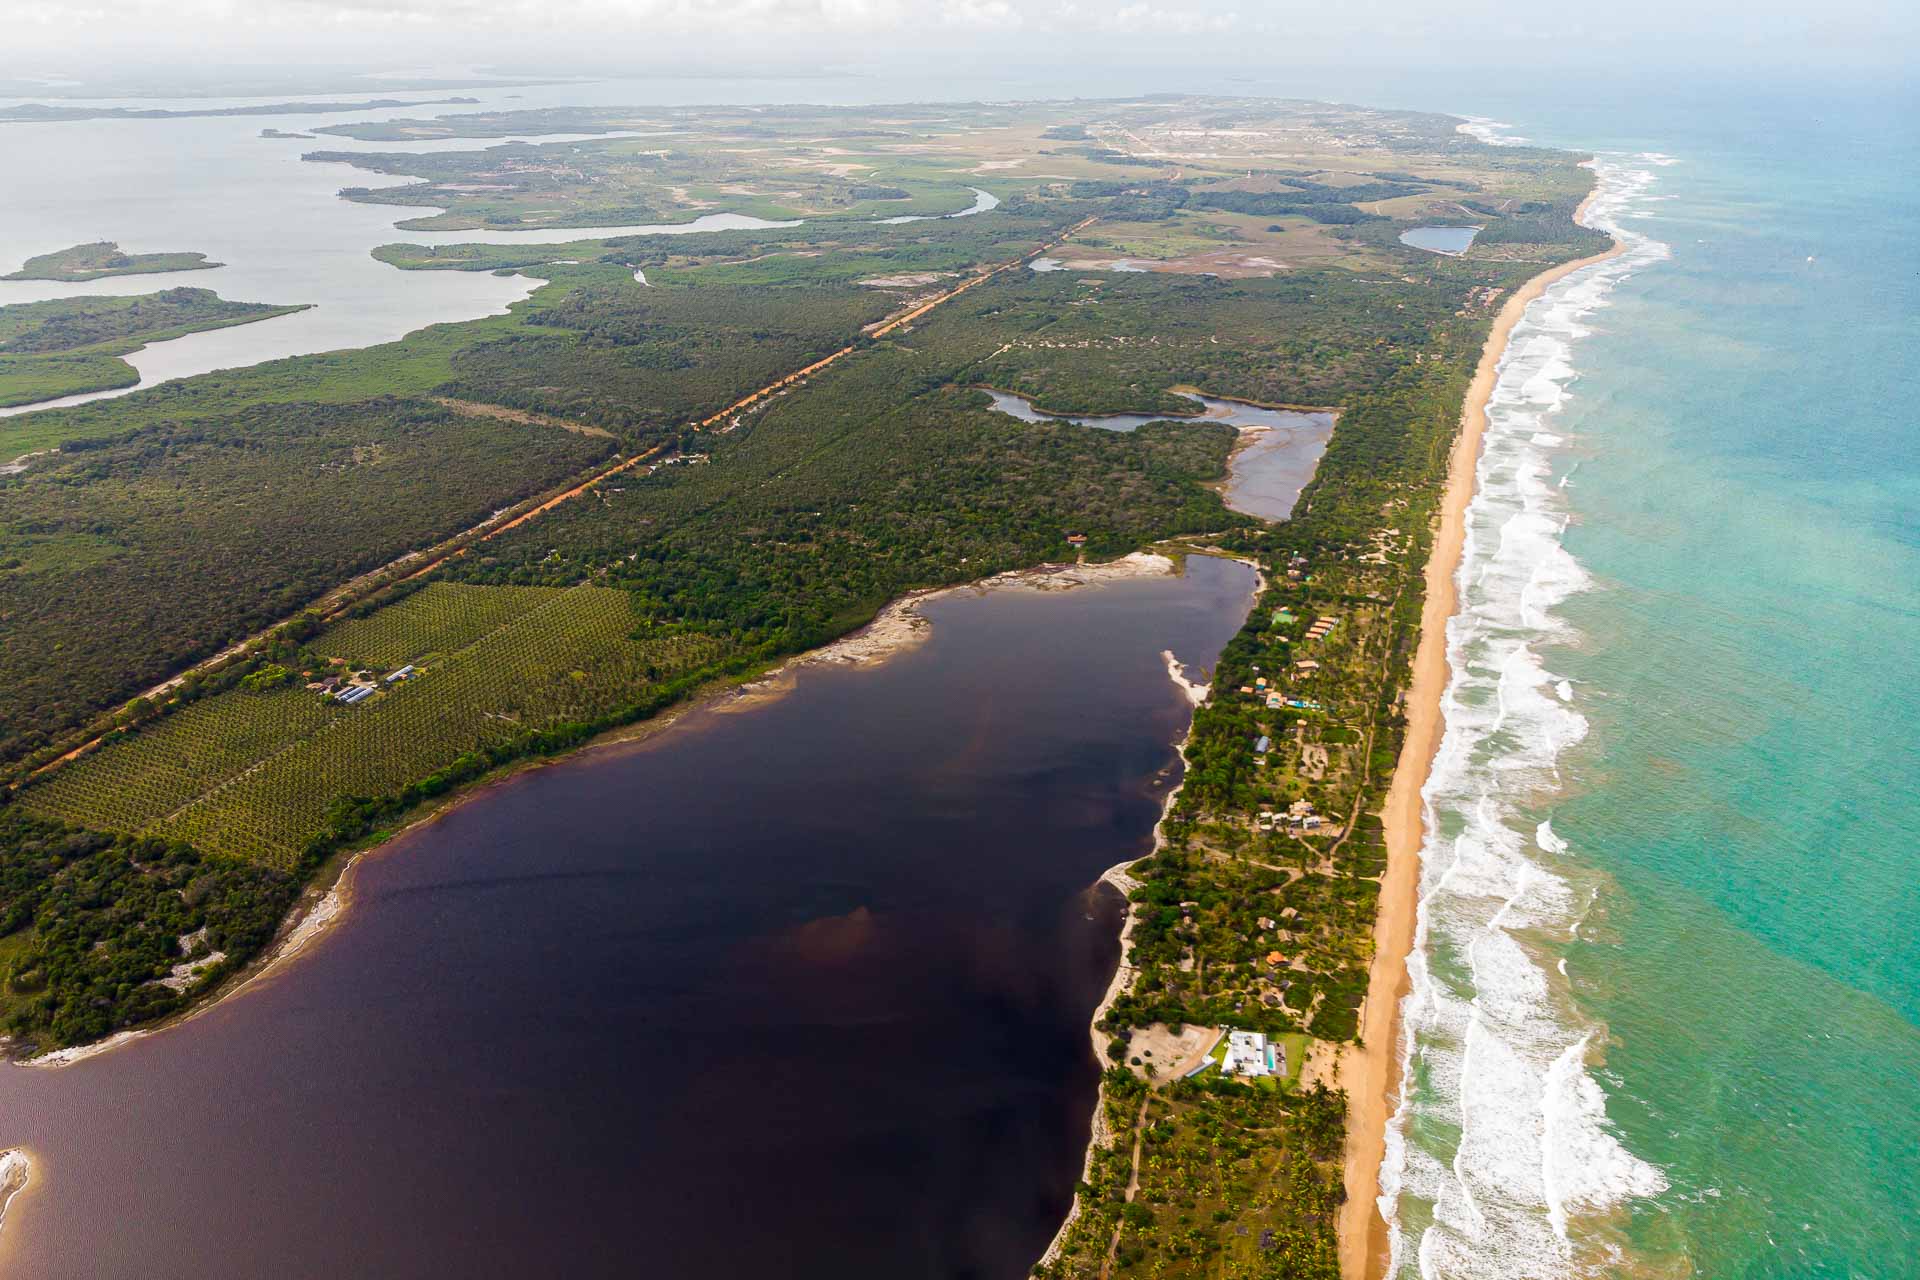 Overview of the Península do Maraú Bahia with the sea in one side and a bay in the other and a lake in the middle